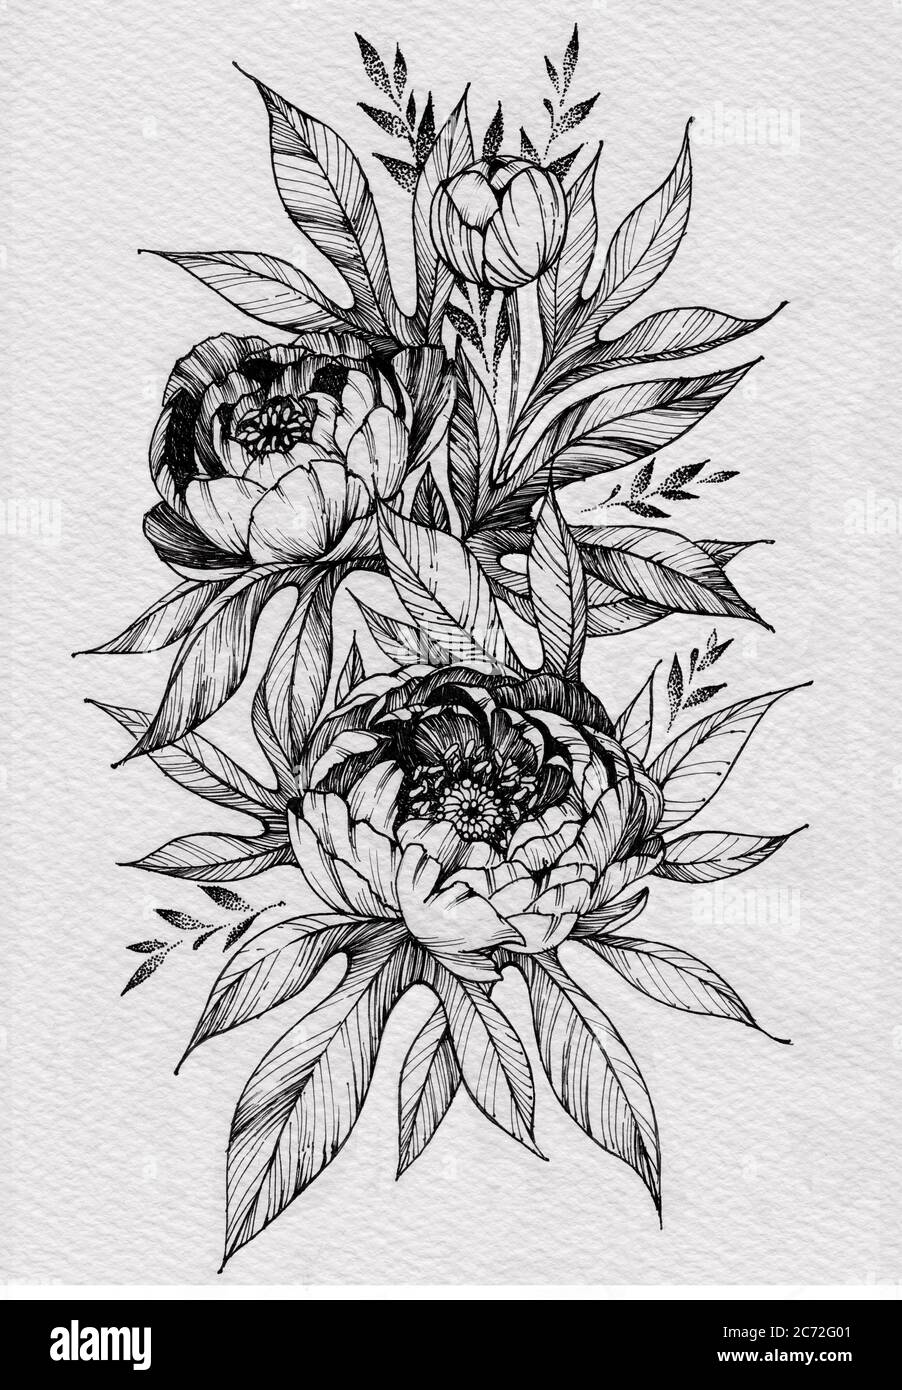 awesome 70 Adorable Peony Tattoo Designs for Men  Pretty but Masculine  Check more at httpstylem  Men flower tattoo Peonies tattoo  Traditional tattoo flowers